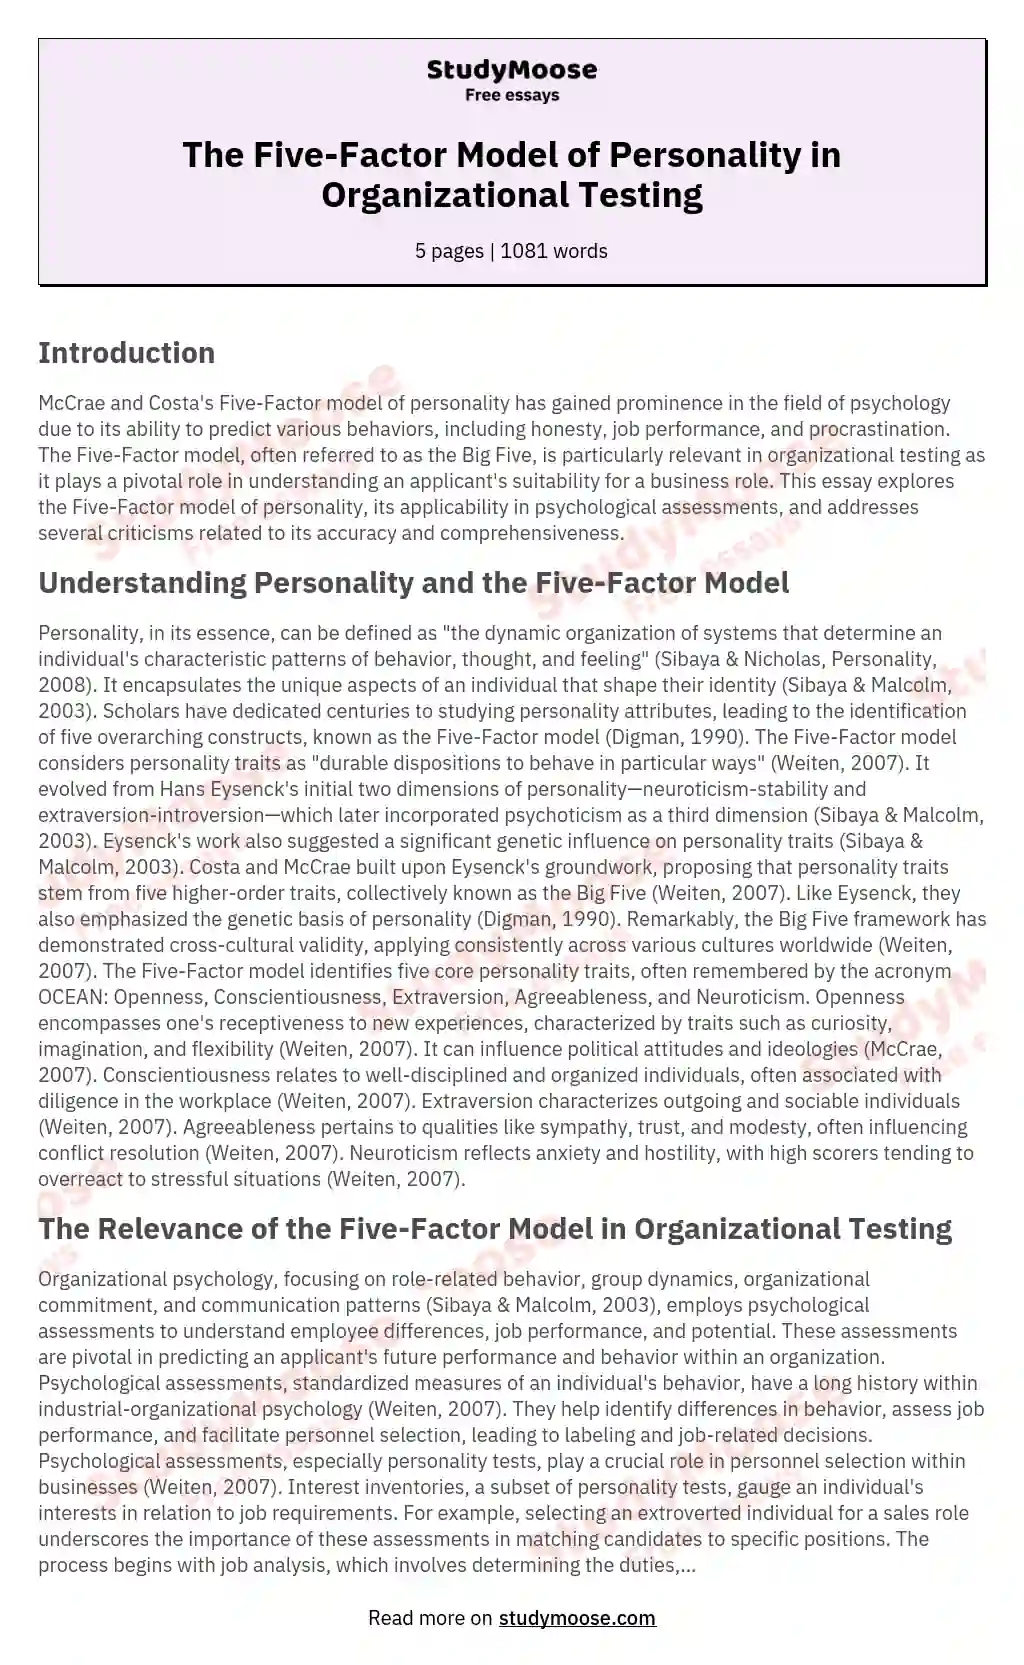 The Five-Factor Model of Personality in Organizational Testing essay